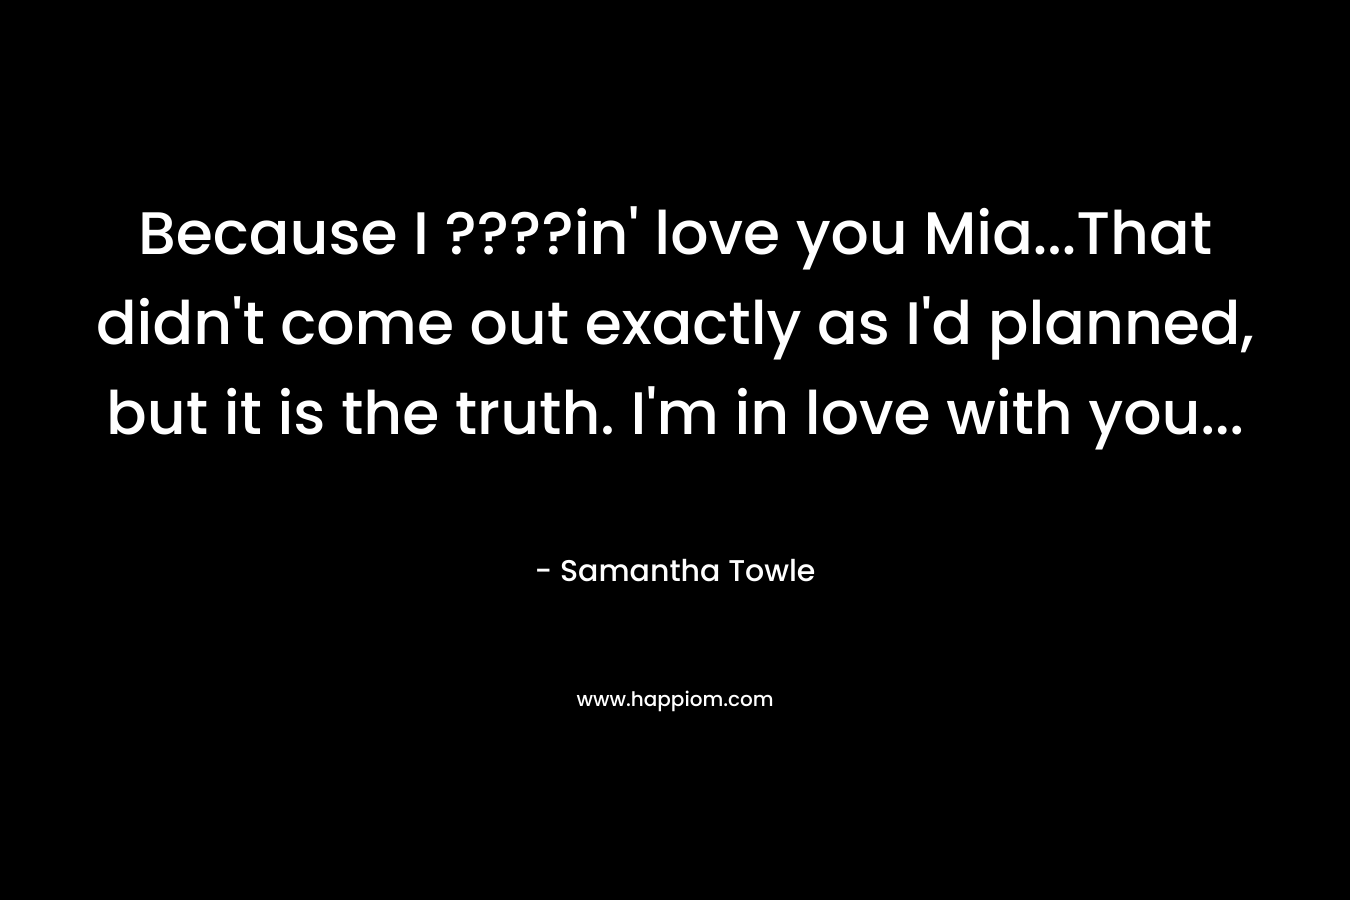 Because I ????in' love you Mia...That didn't come out exactly as I'd planned, but it is the truth. I'm in love with you...